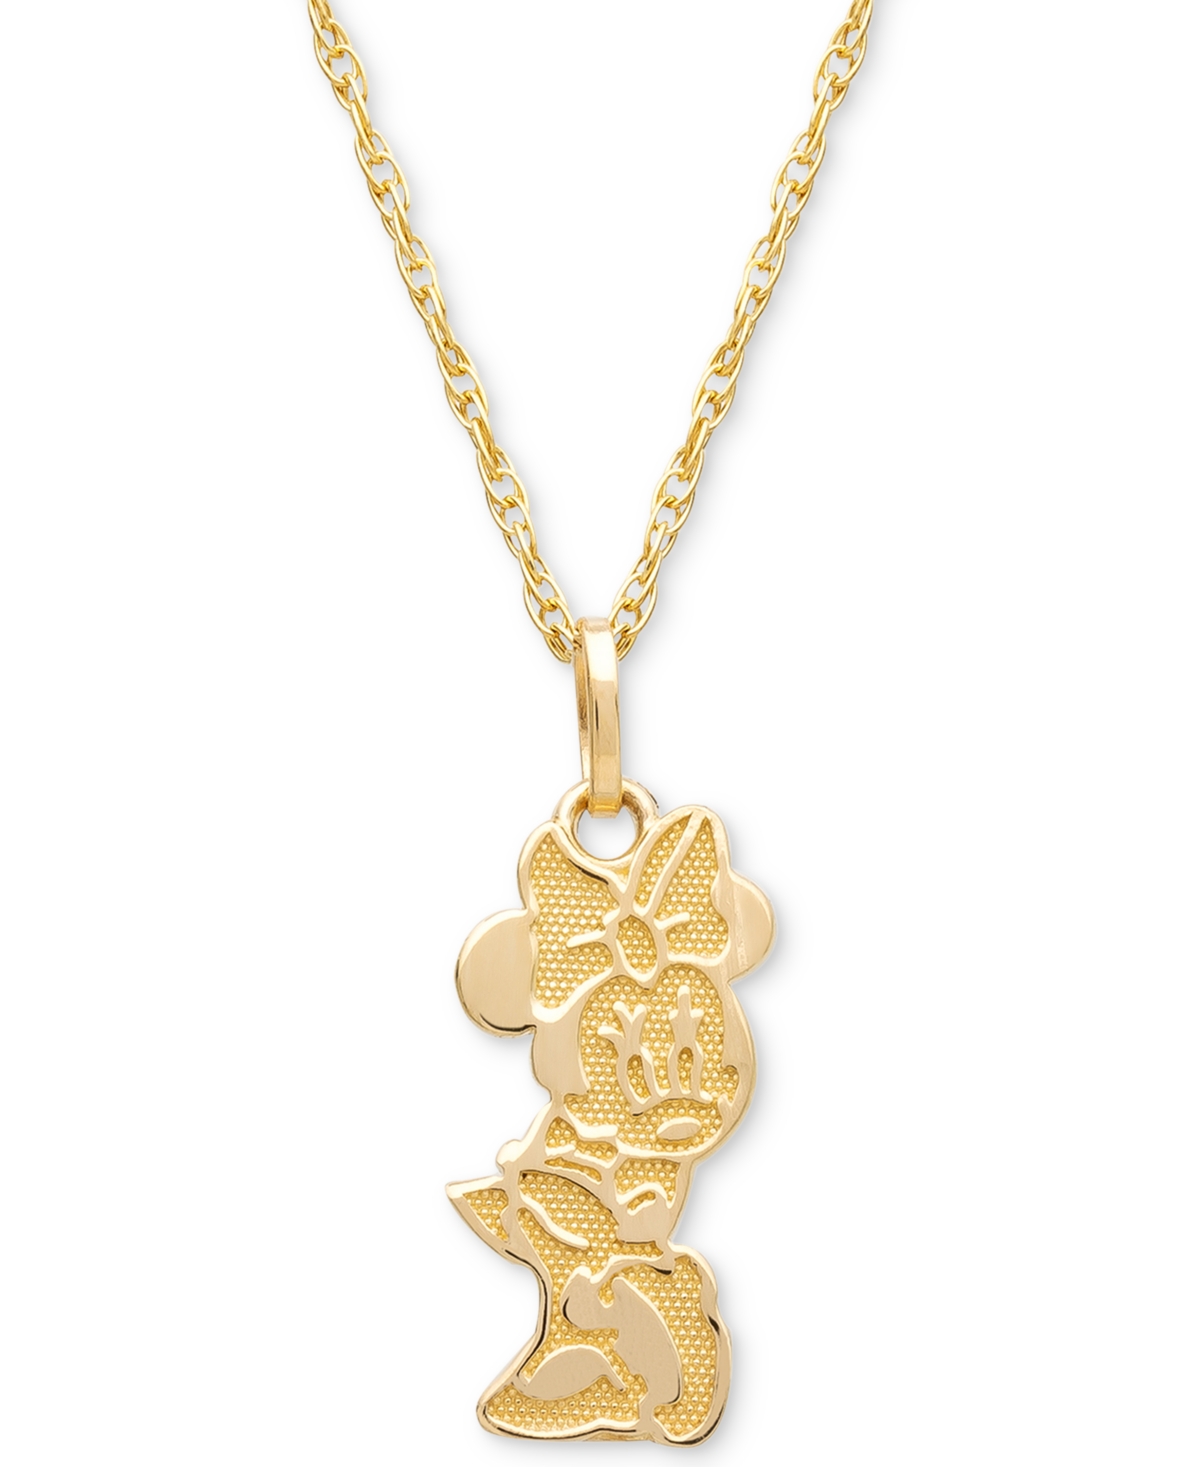 Children's Minnie Mouse Character 15" Pendant Necklace in 14k Gold - Yellow Gold